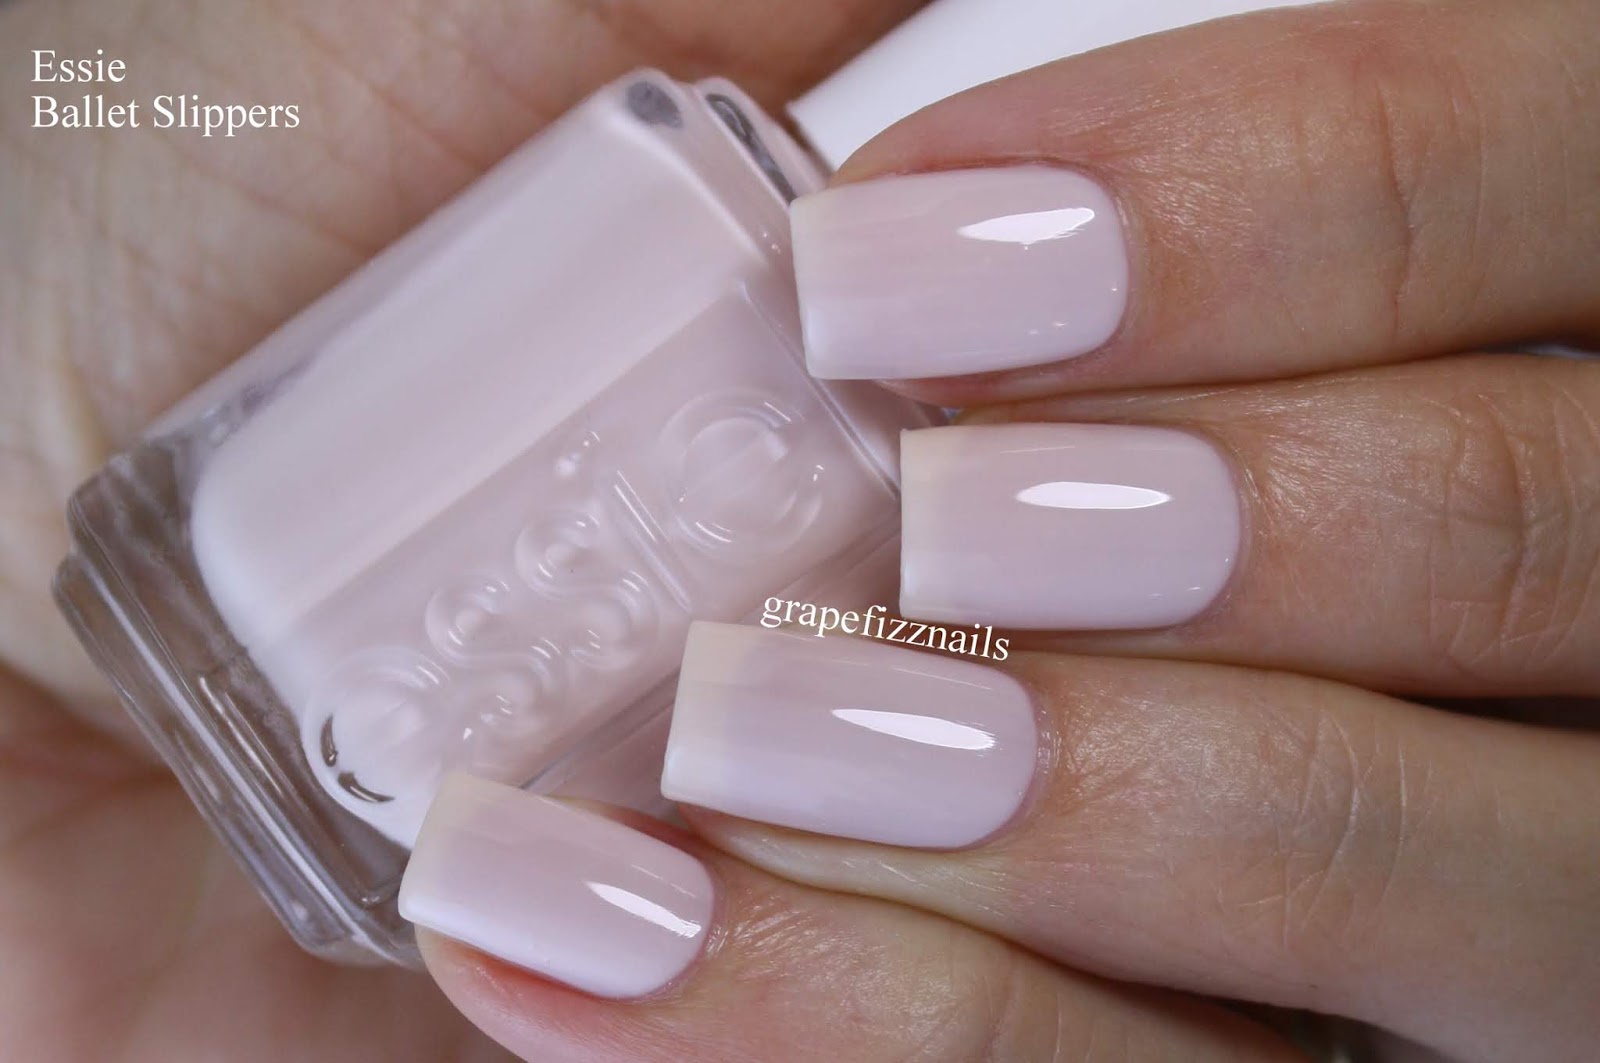 2. Essie Nail Polish in "Ballet Slippers" - wide 6